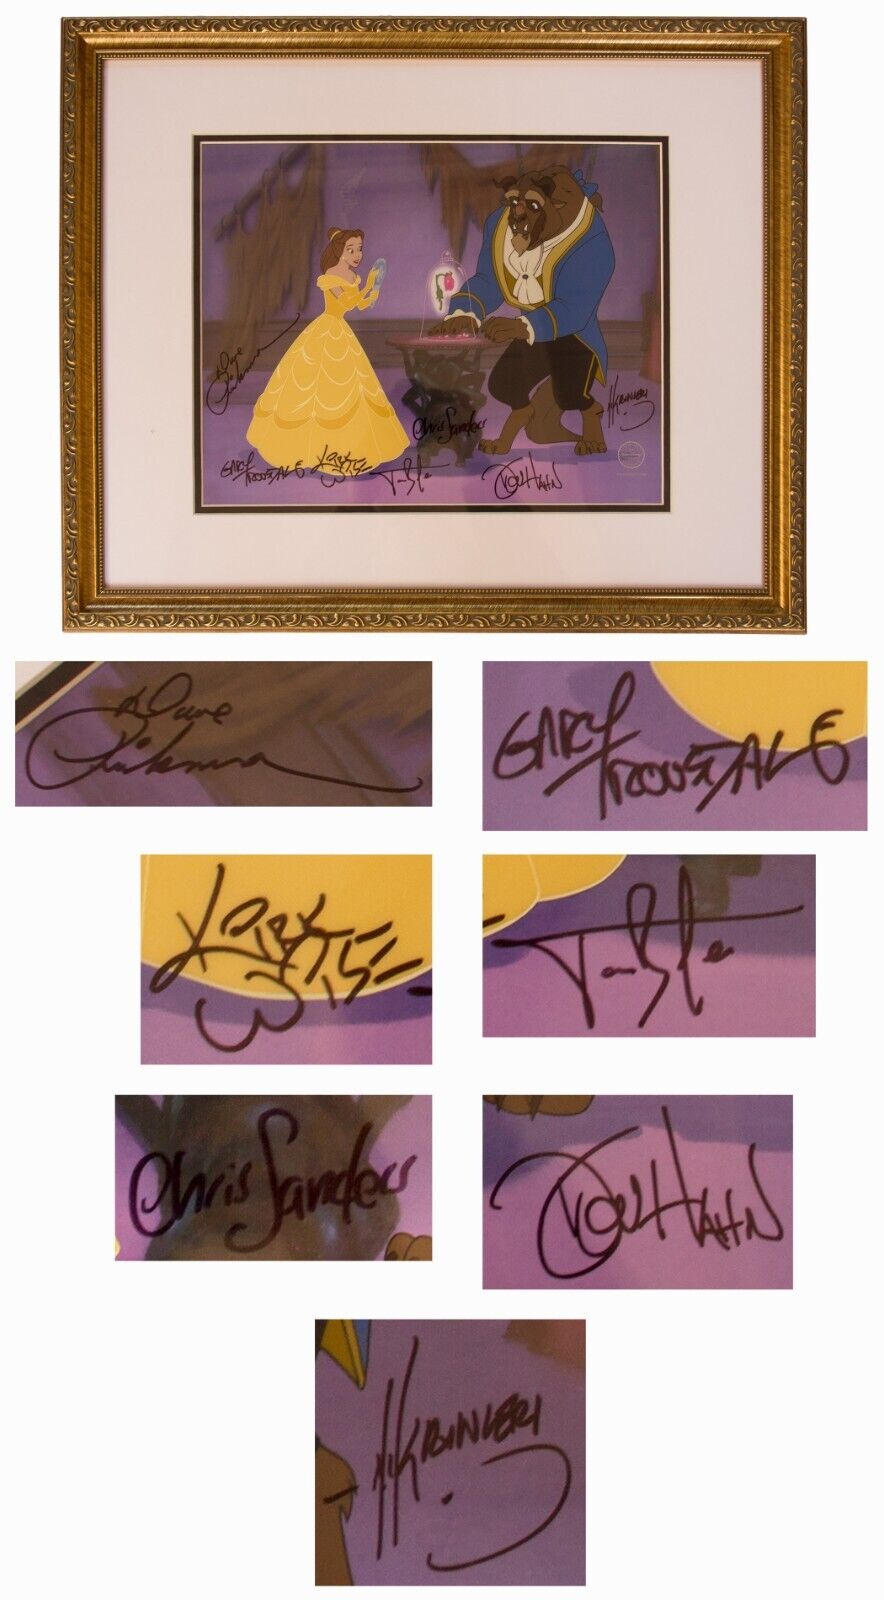 Beauty & The Beast Sericel Of Only 3500, Signed By 7 Film Creators. Disney Coa.